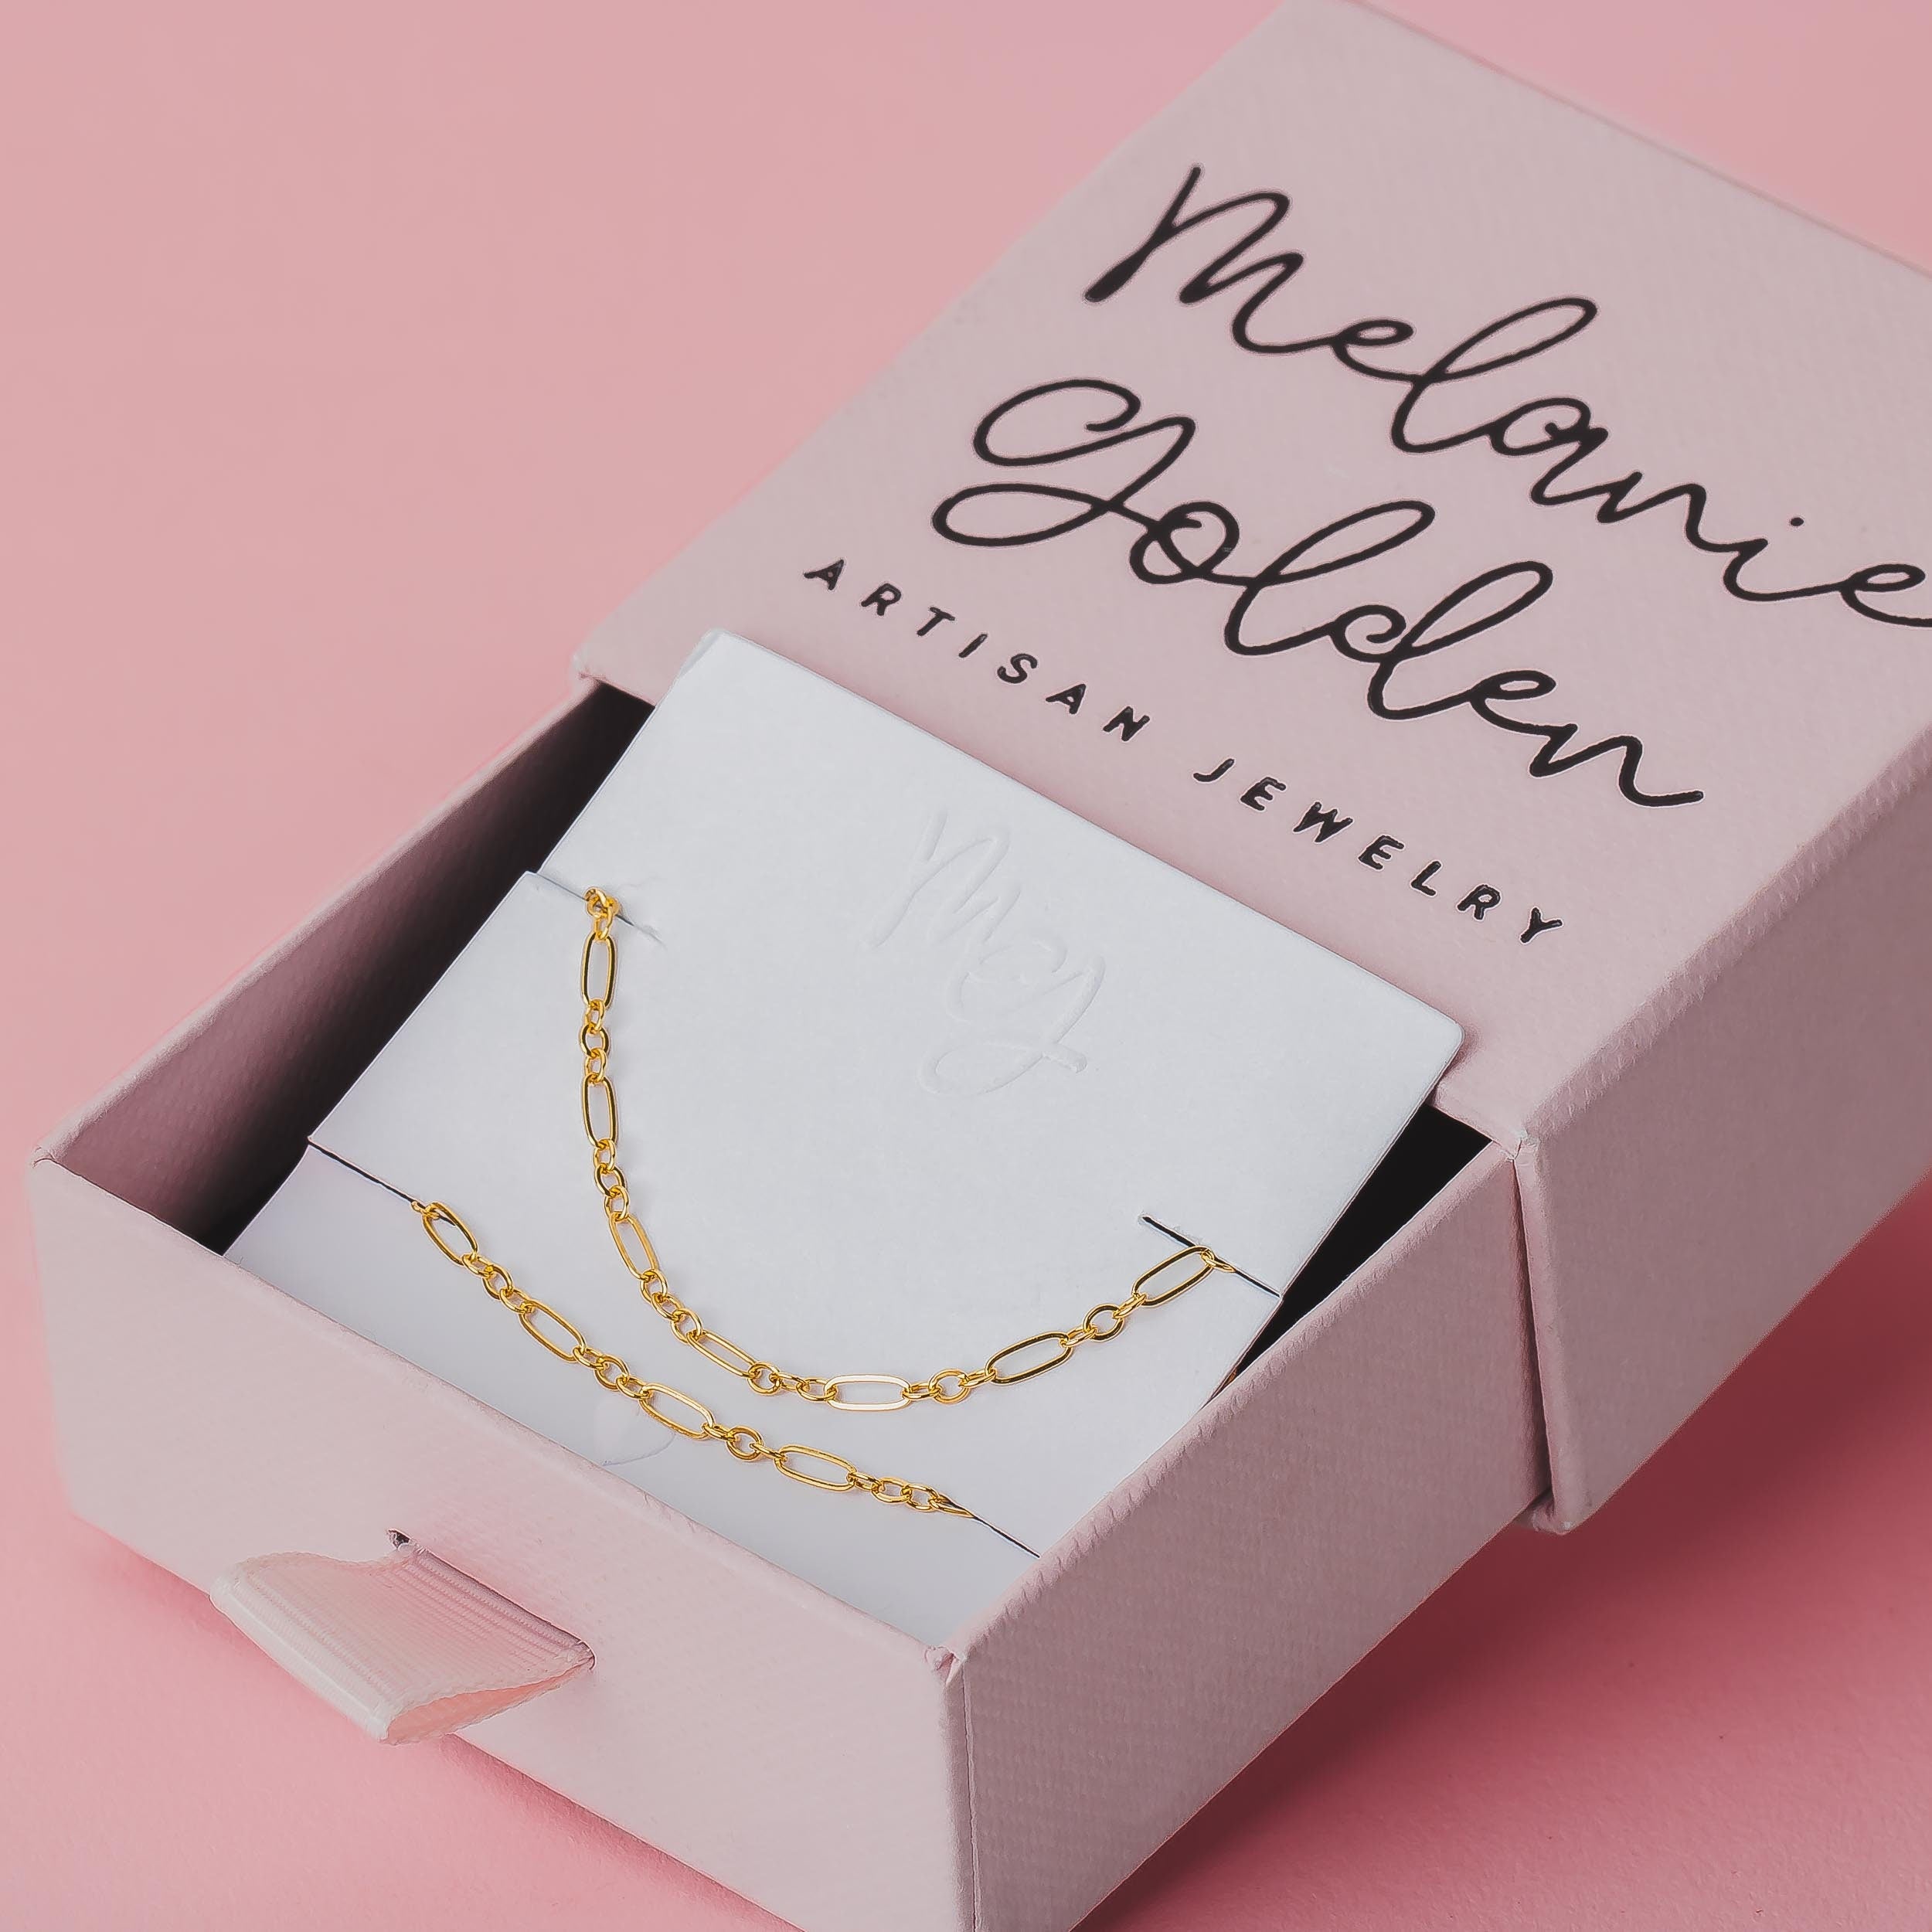 Sadie Chain Necklace & Bracelet Gift Set - Melanie Golden Jewelry - _badge_new, bracelet, bridal party, essential chains, everyday essentials, gift sets, love, necklace, new